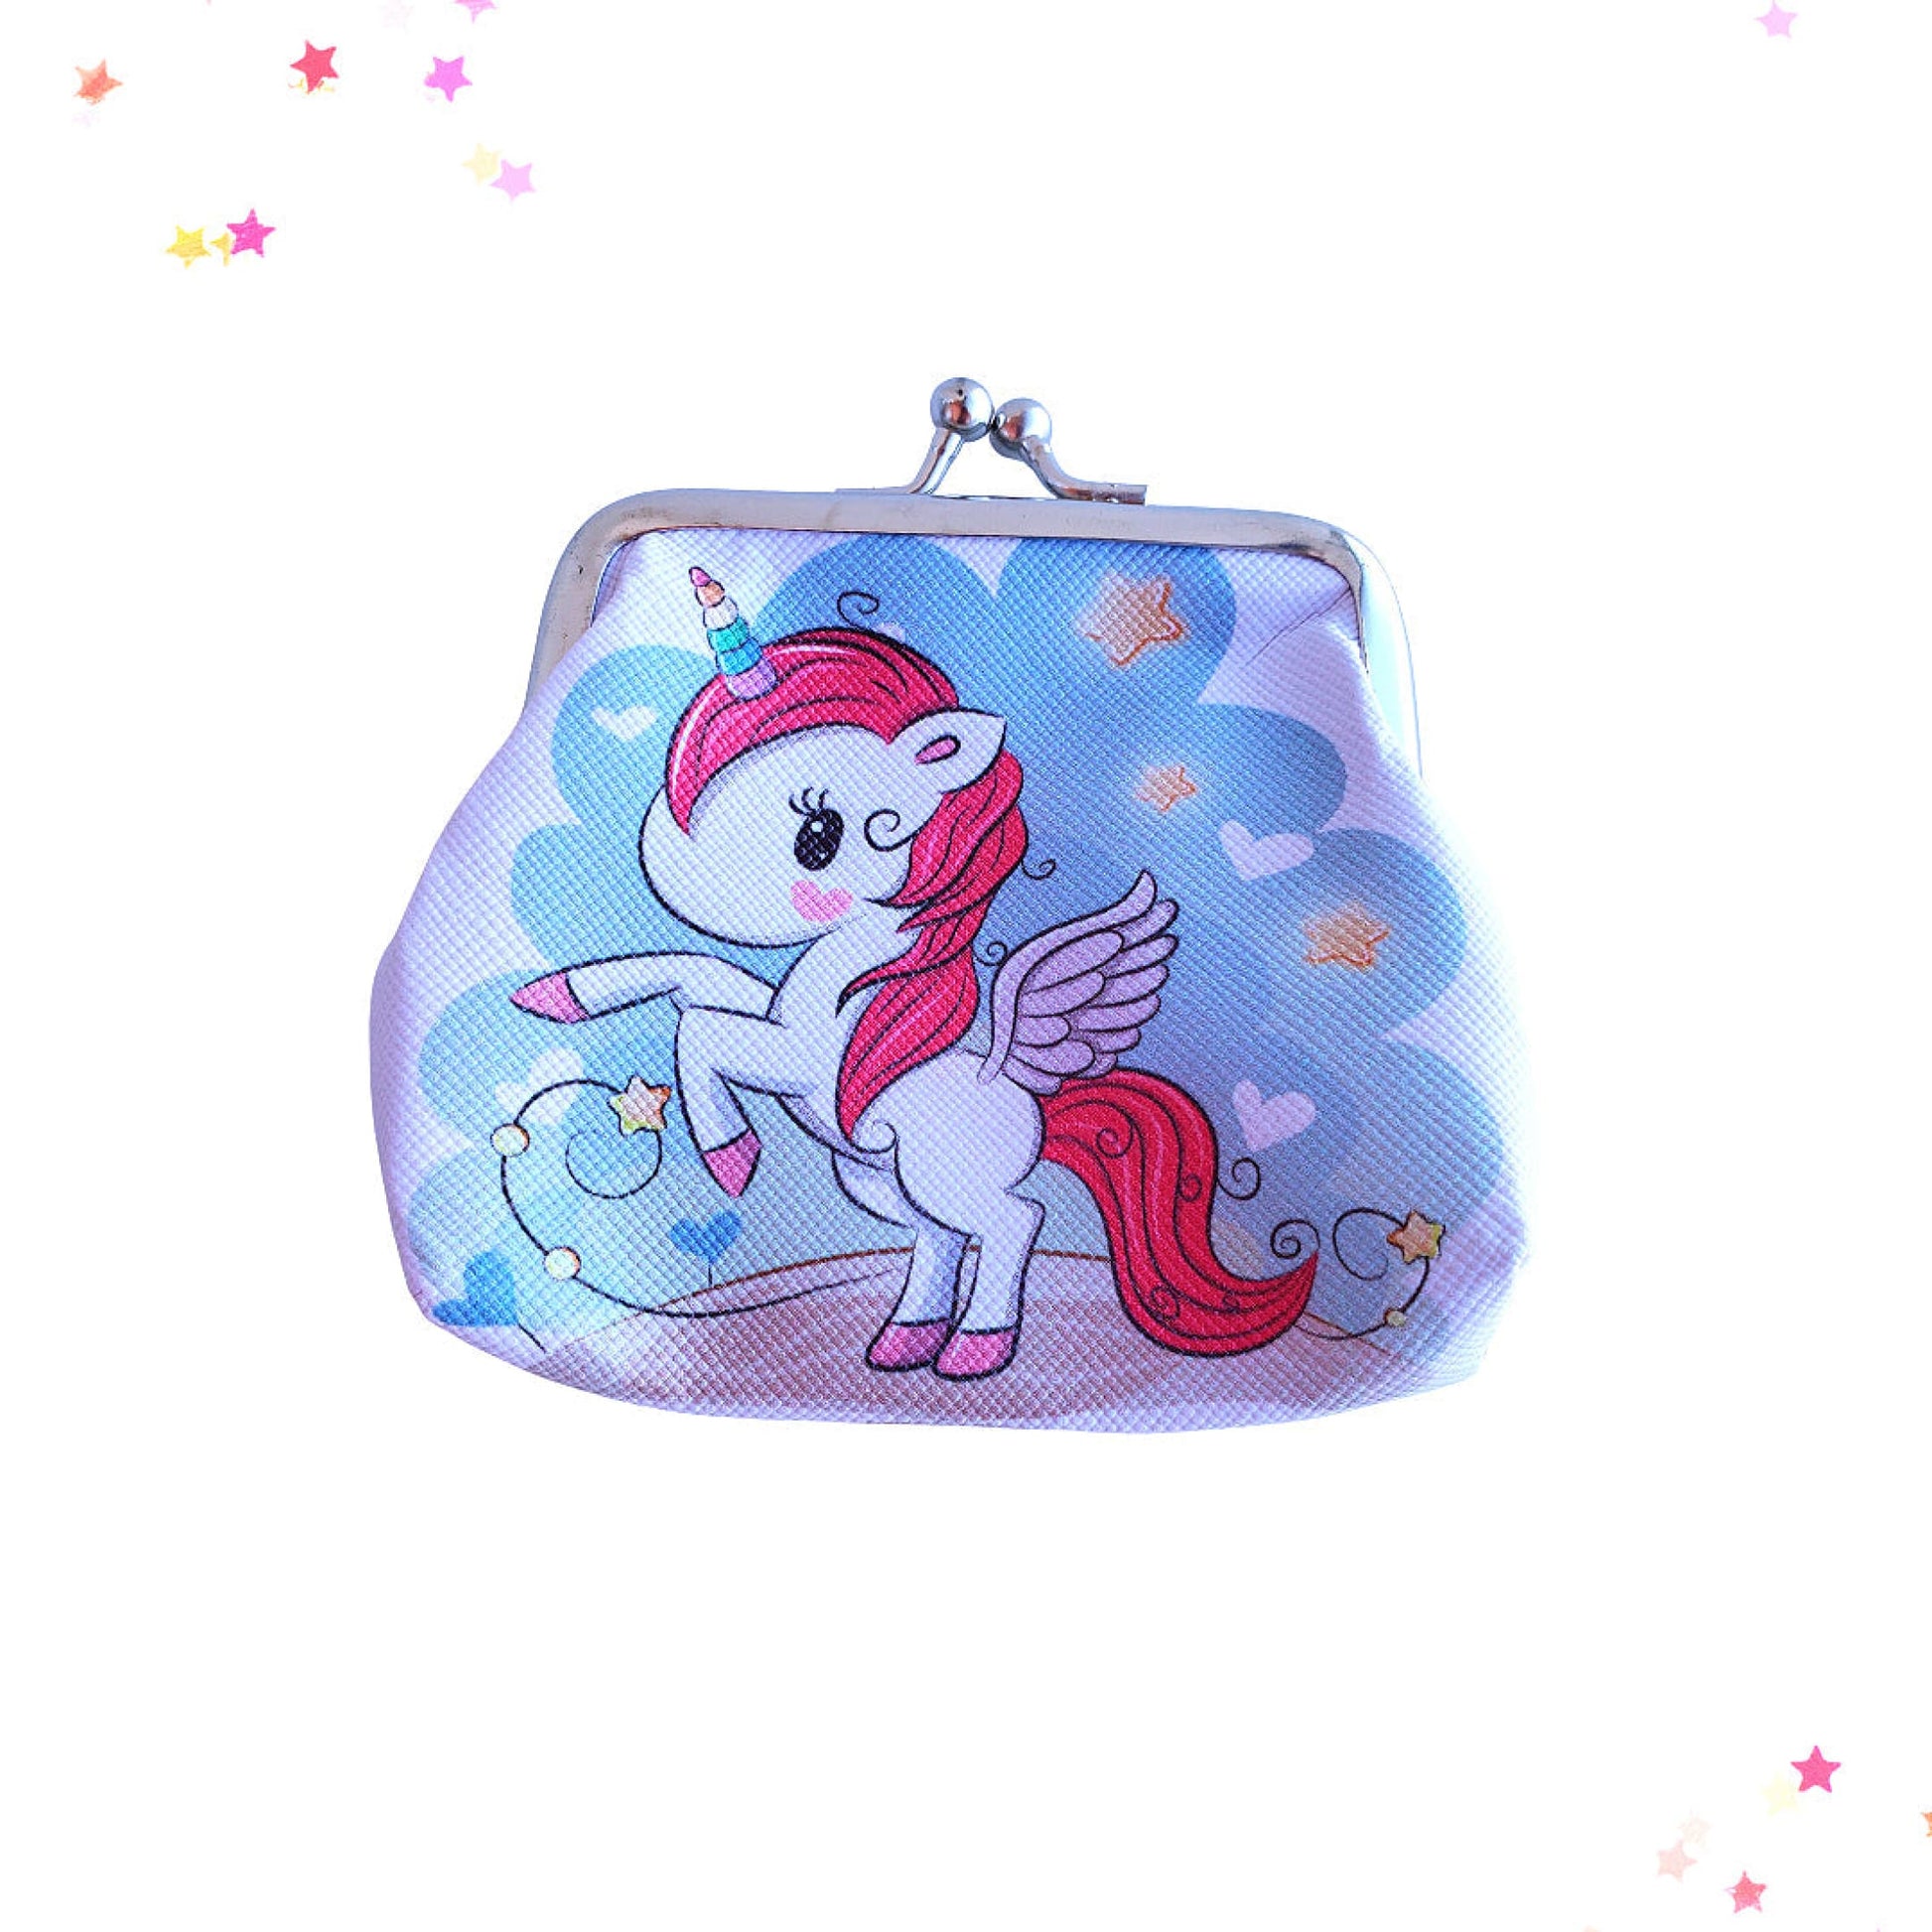 Easy-Open Unicorn Coin Purse in Solo from Confetti Kitty, Only 4.99